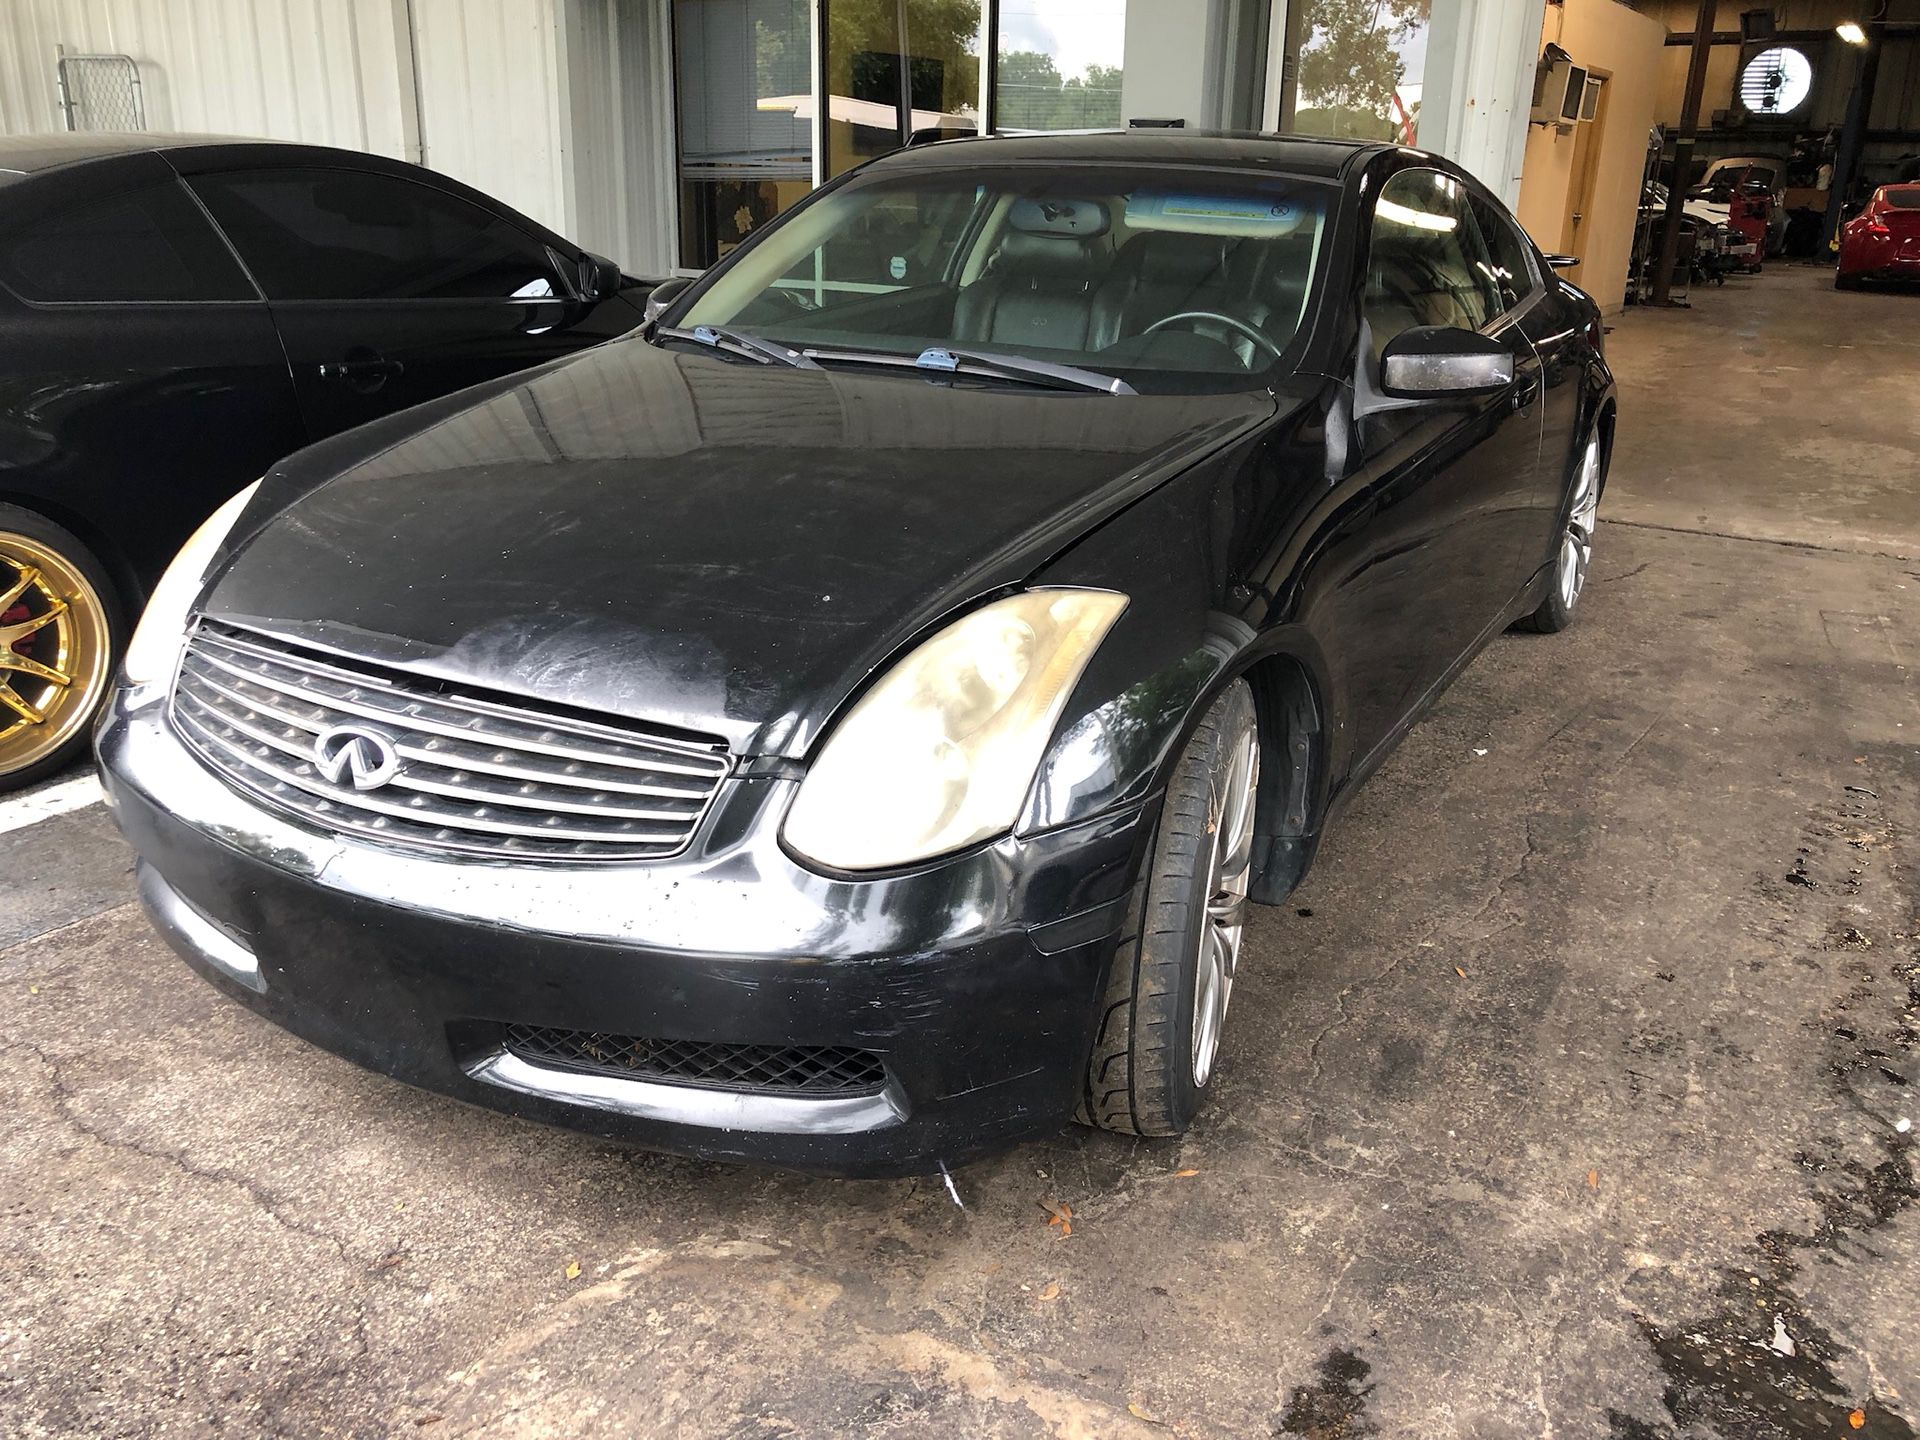 Parting out 2 Infiniti G35 a 2004 and a 2006